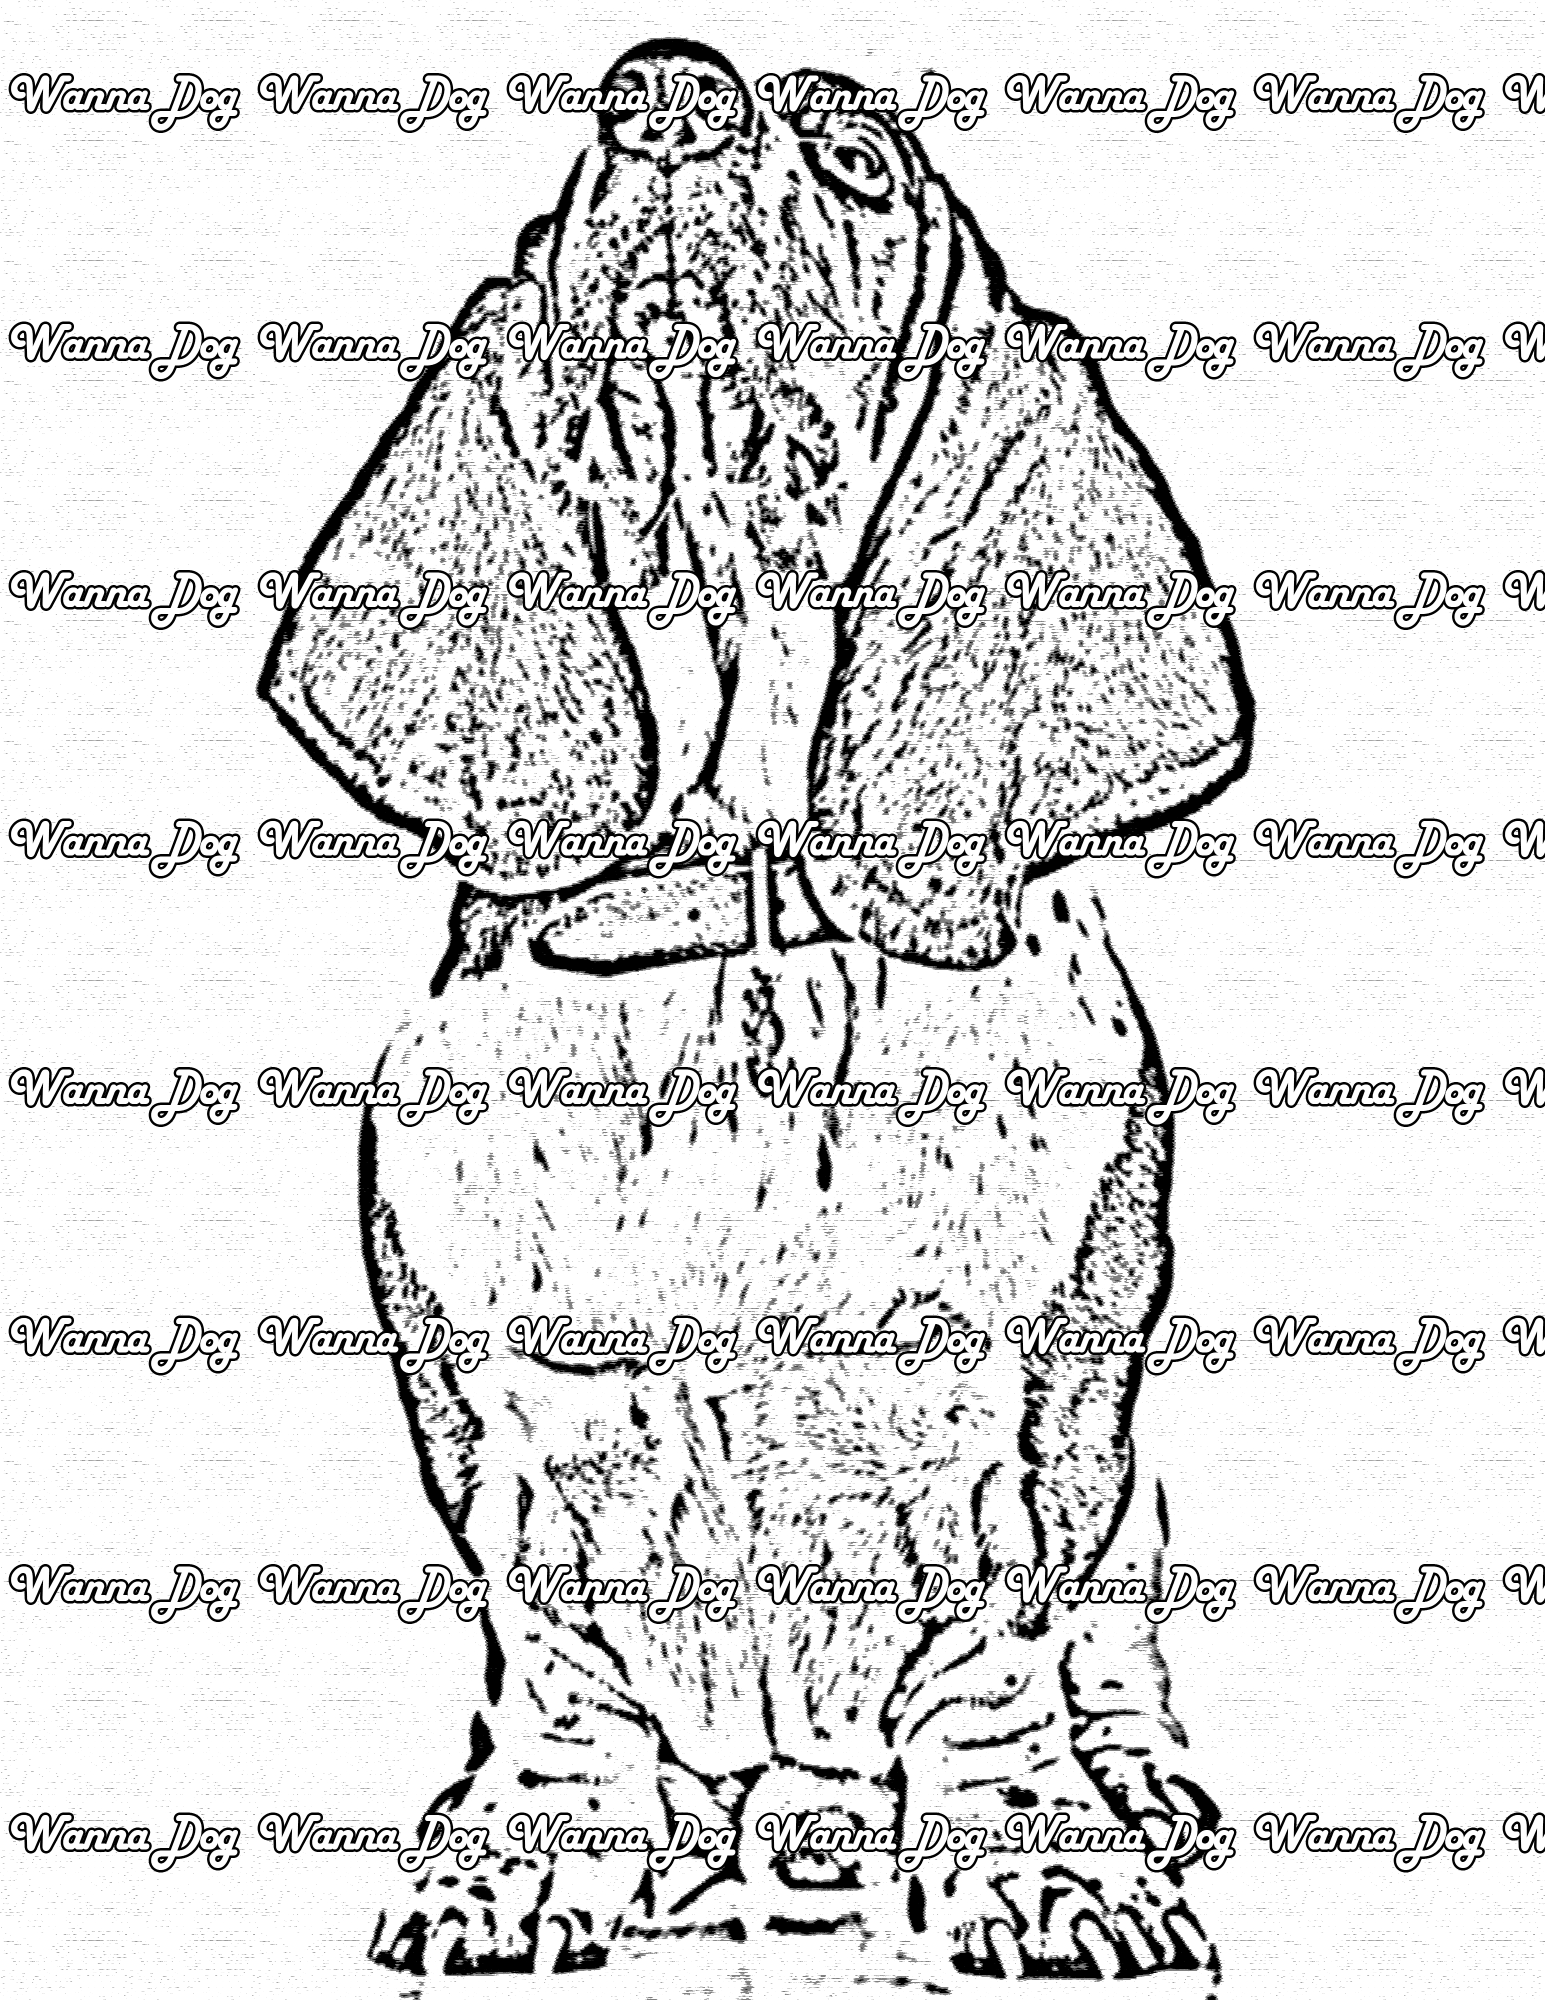 Basset Hound Coloring Page of a Basset Hound with their head up